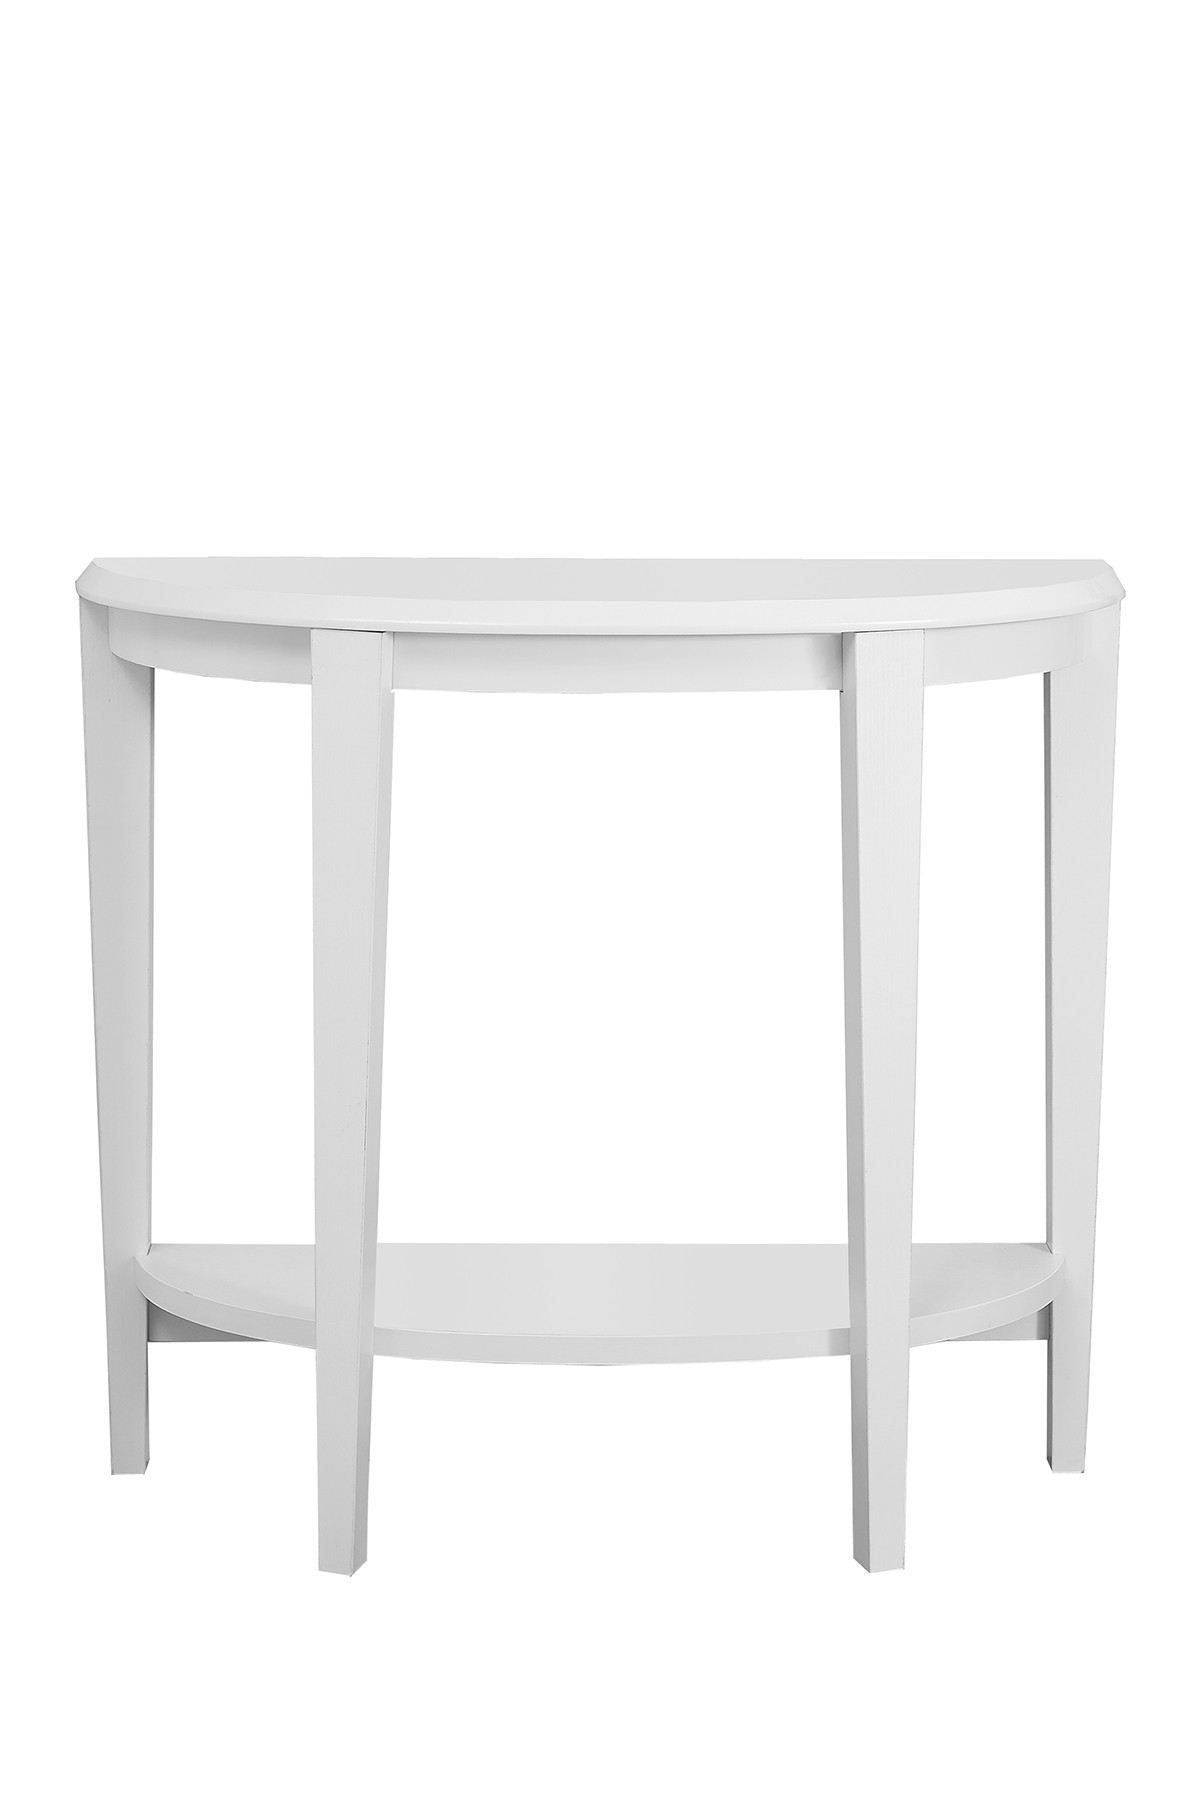 monarch specialties white hall console accent table nordstrom rack target sleeper sofa patio swing black and gold wine side end bunnings garden seat gray tables quatrefoil coffee